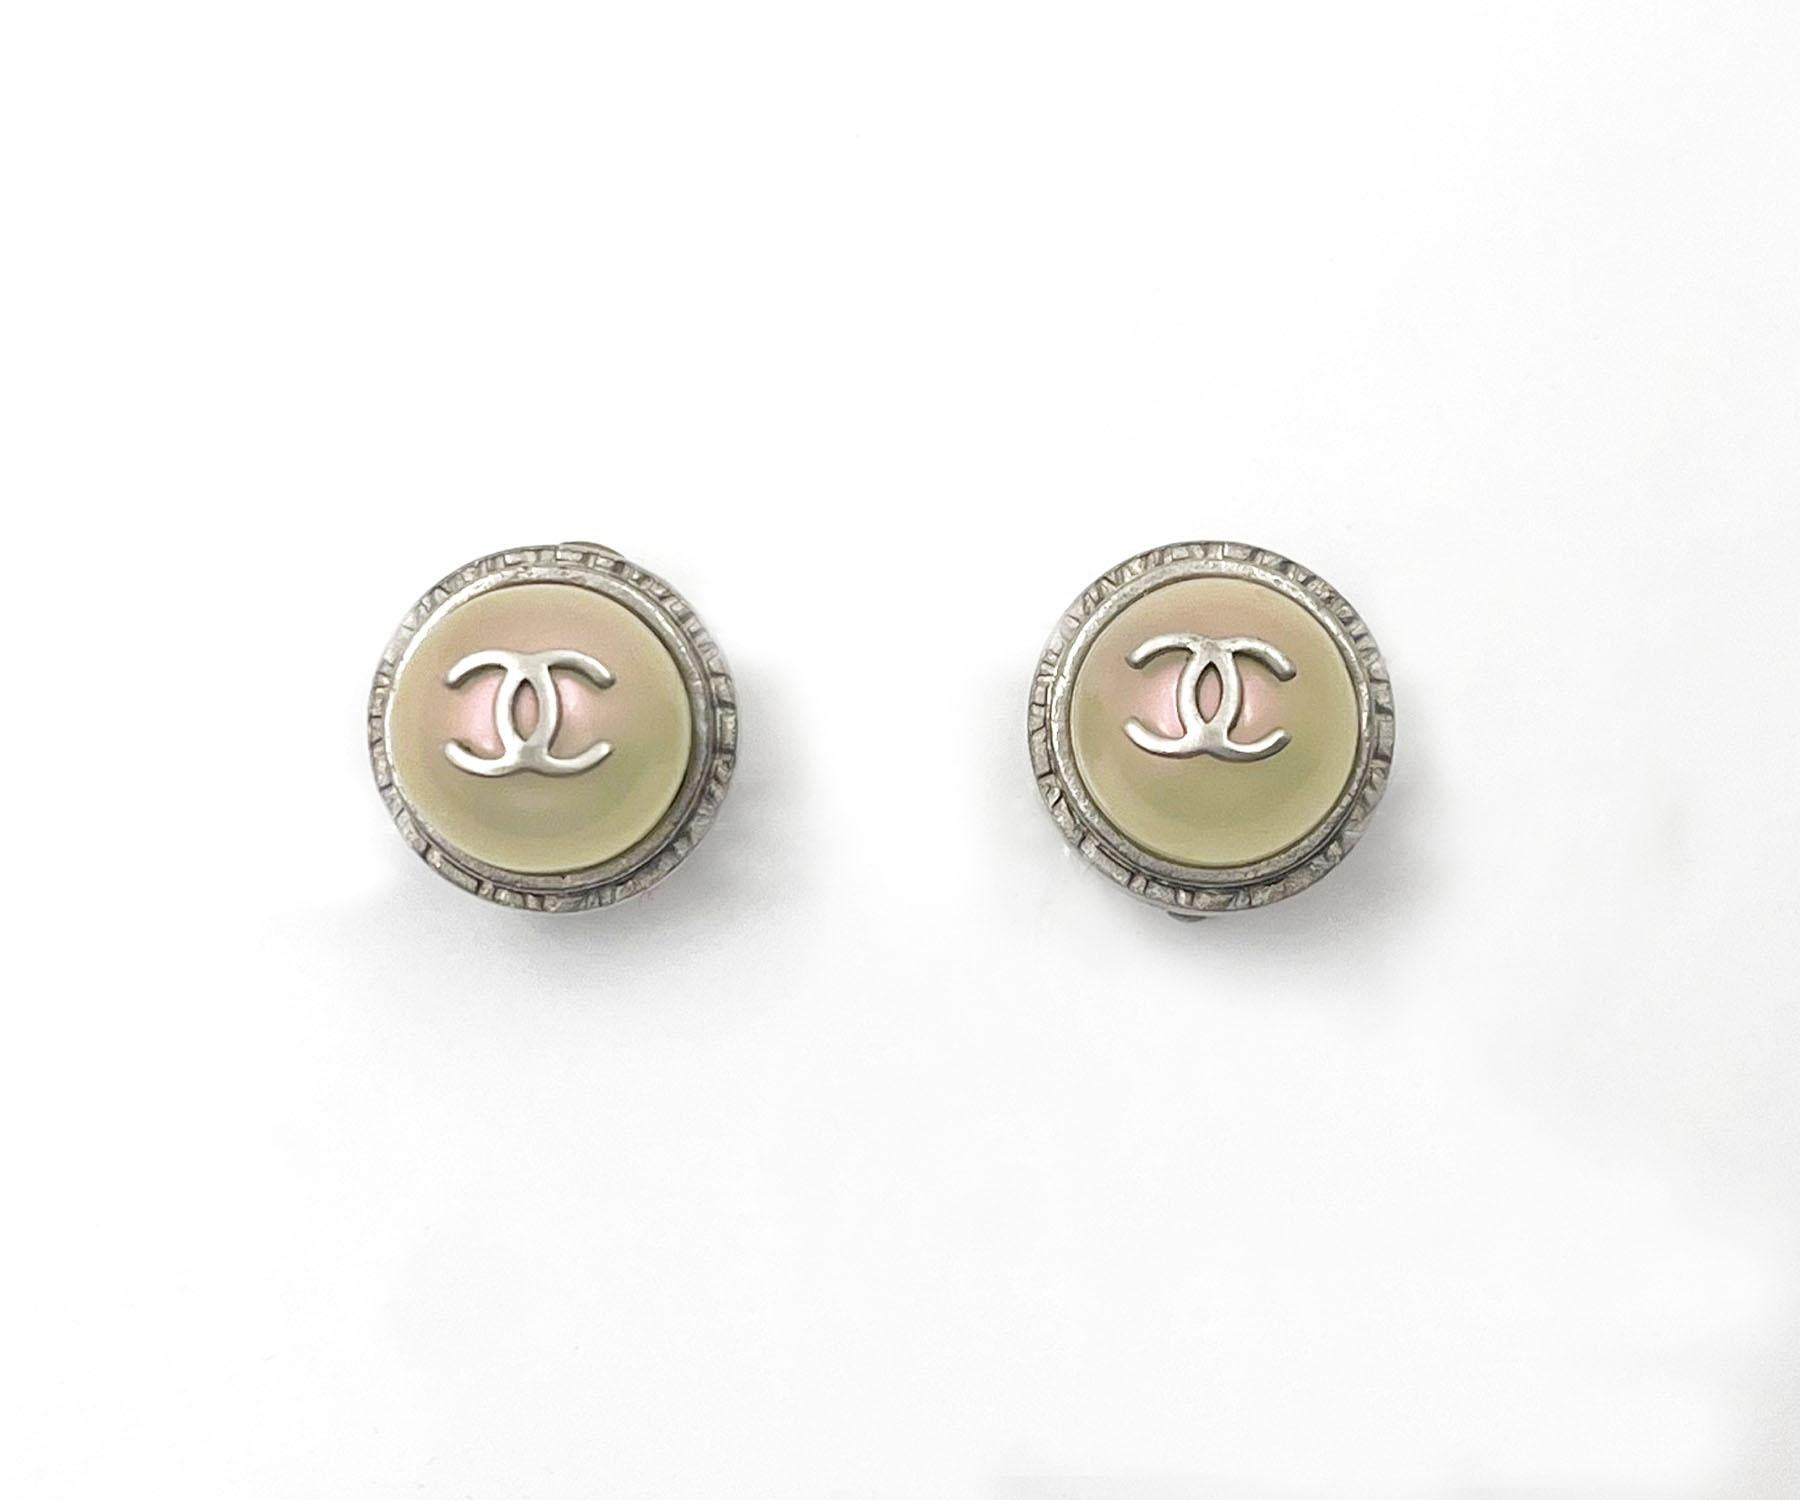 Chanel Silver CC Iridescent Pearl Gumball Clip on Earrings 
 
*Marked 98
*Made in France
*Comes with the original box

-It is approximately 0.55